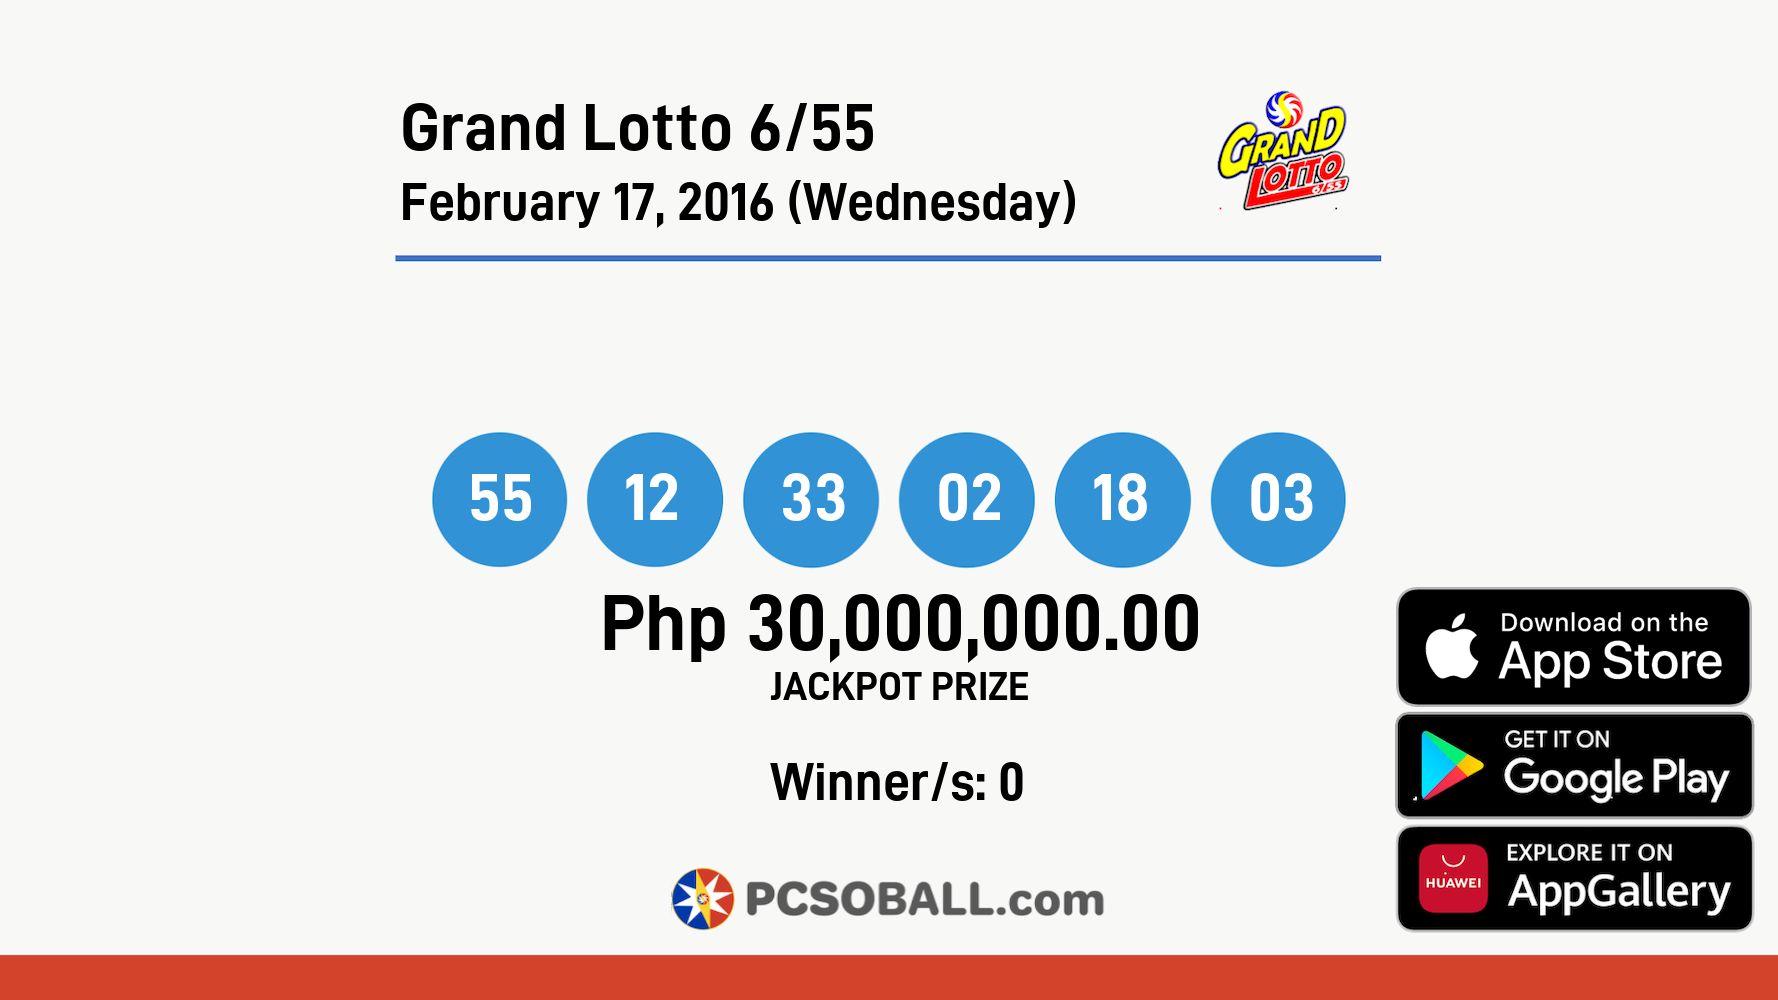 Grand Lotto 6/55 February 17, 2016 (Wednesday) Result